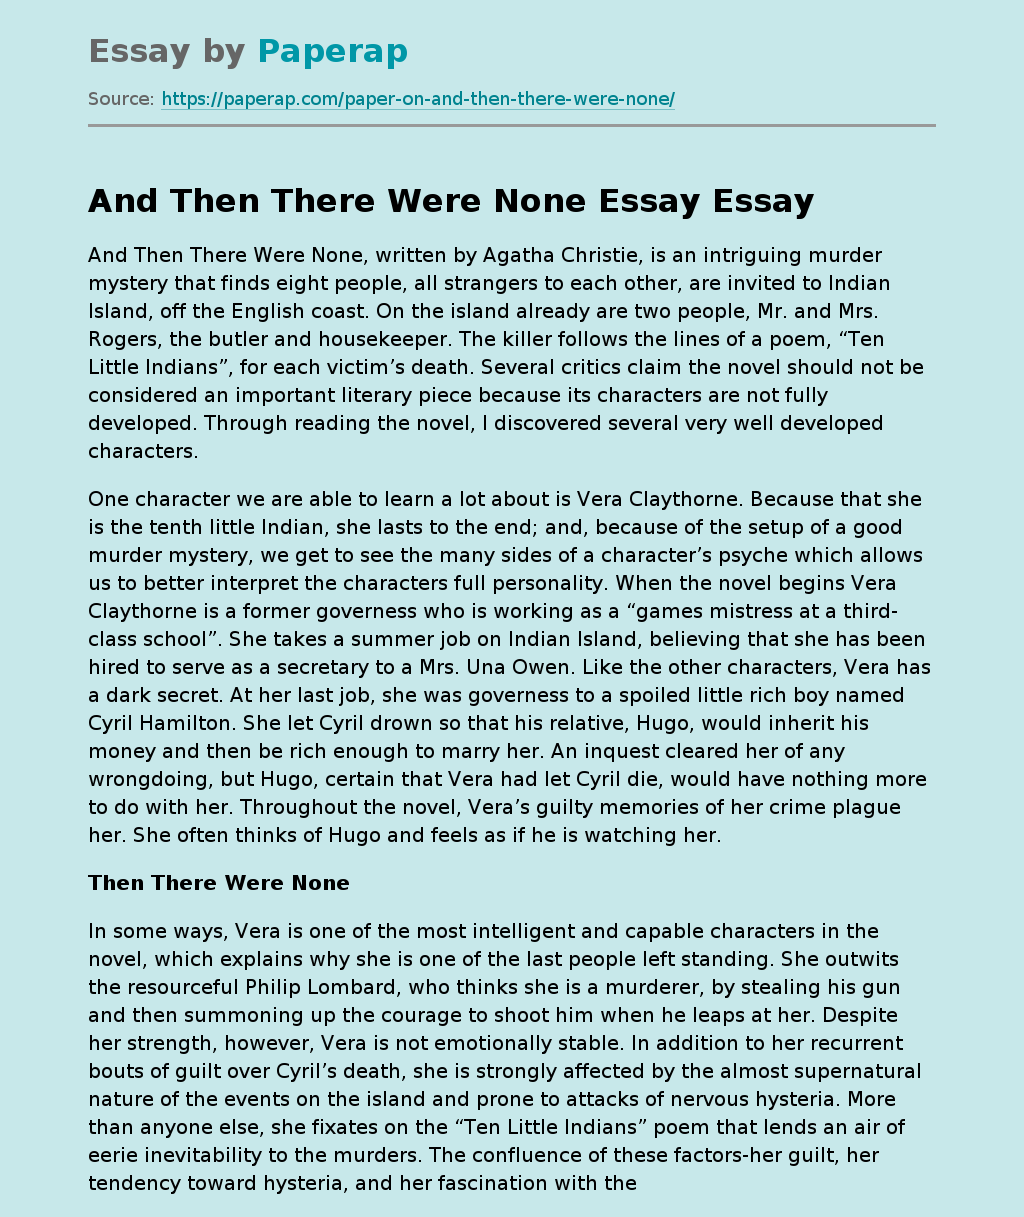 And Then There Were None Essay